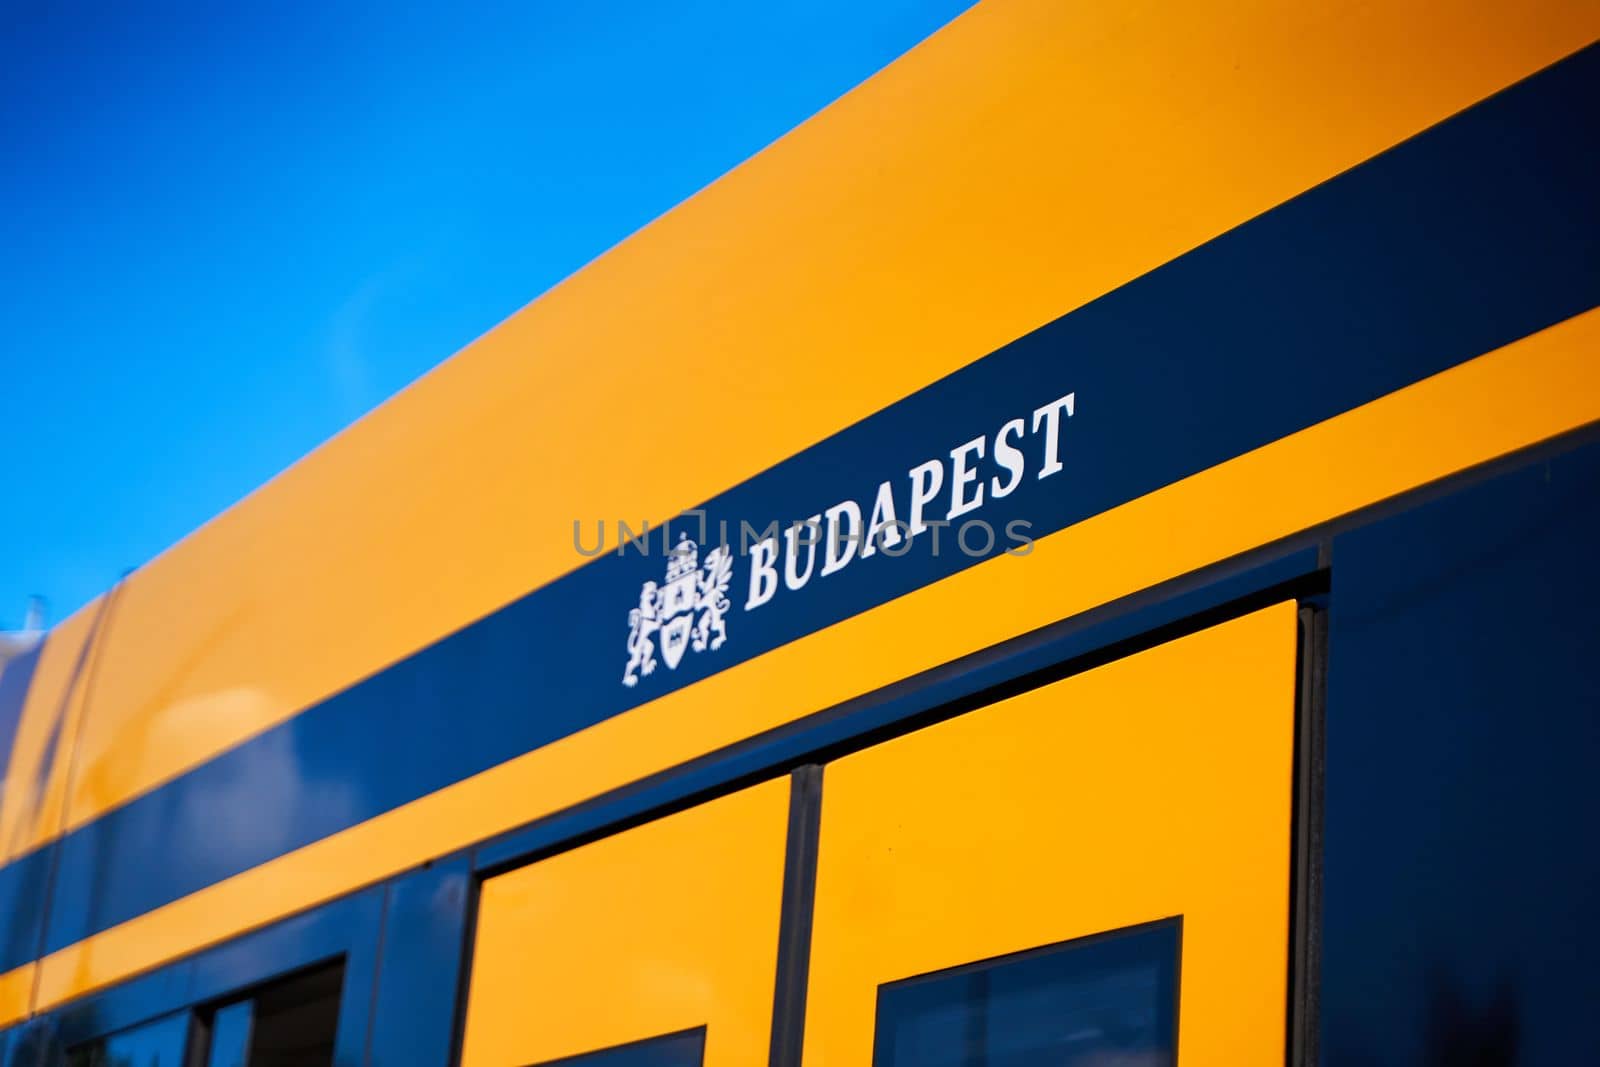 A sign with the name of the city of Budapest on a public tram.